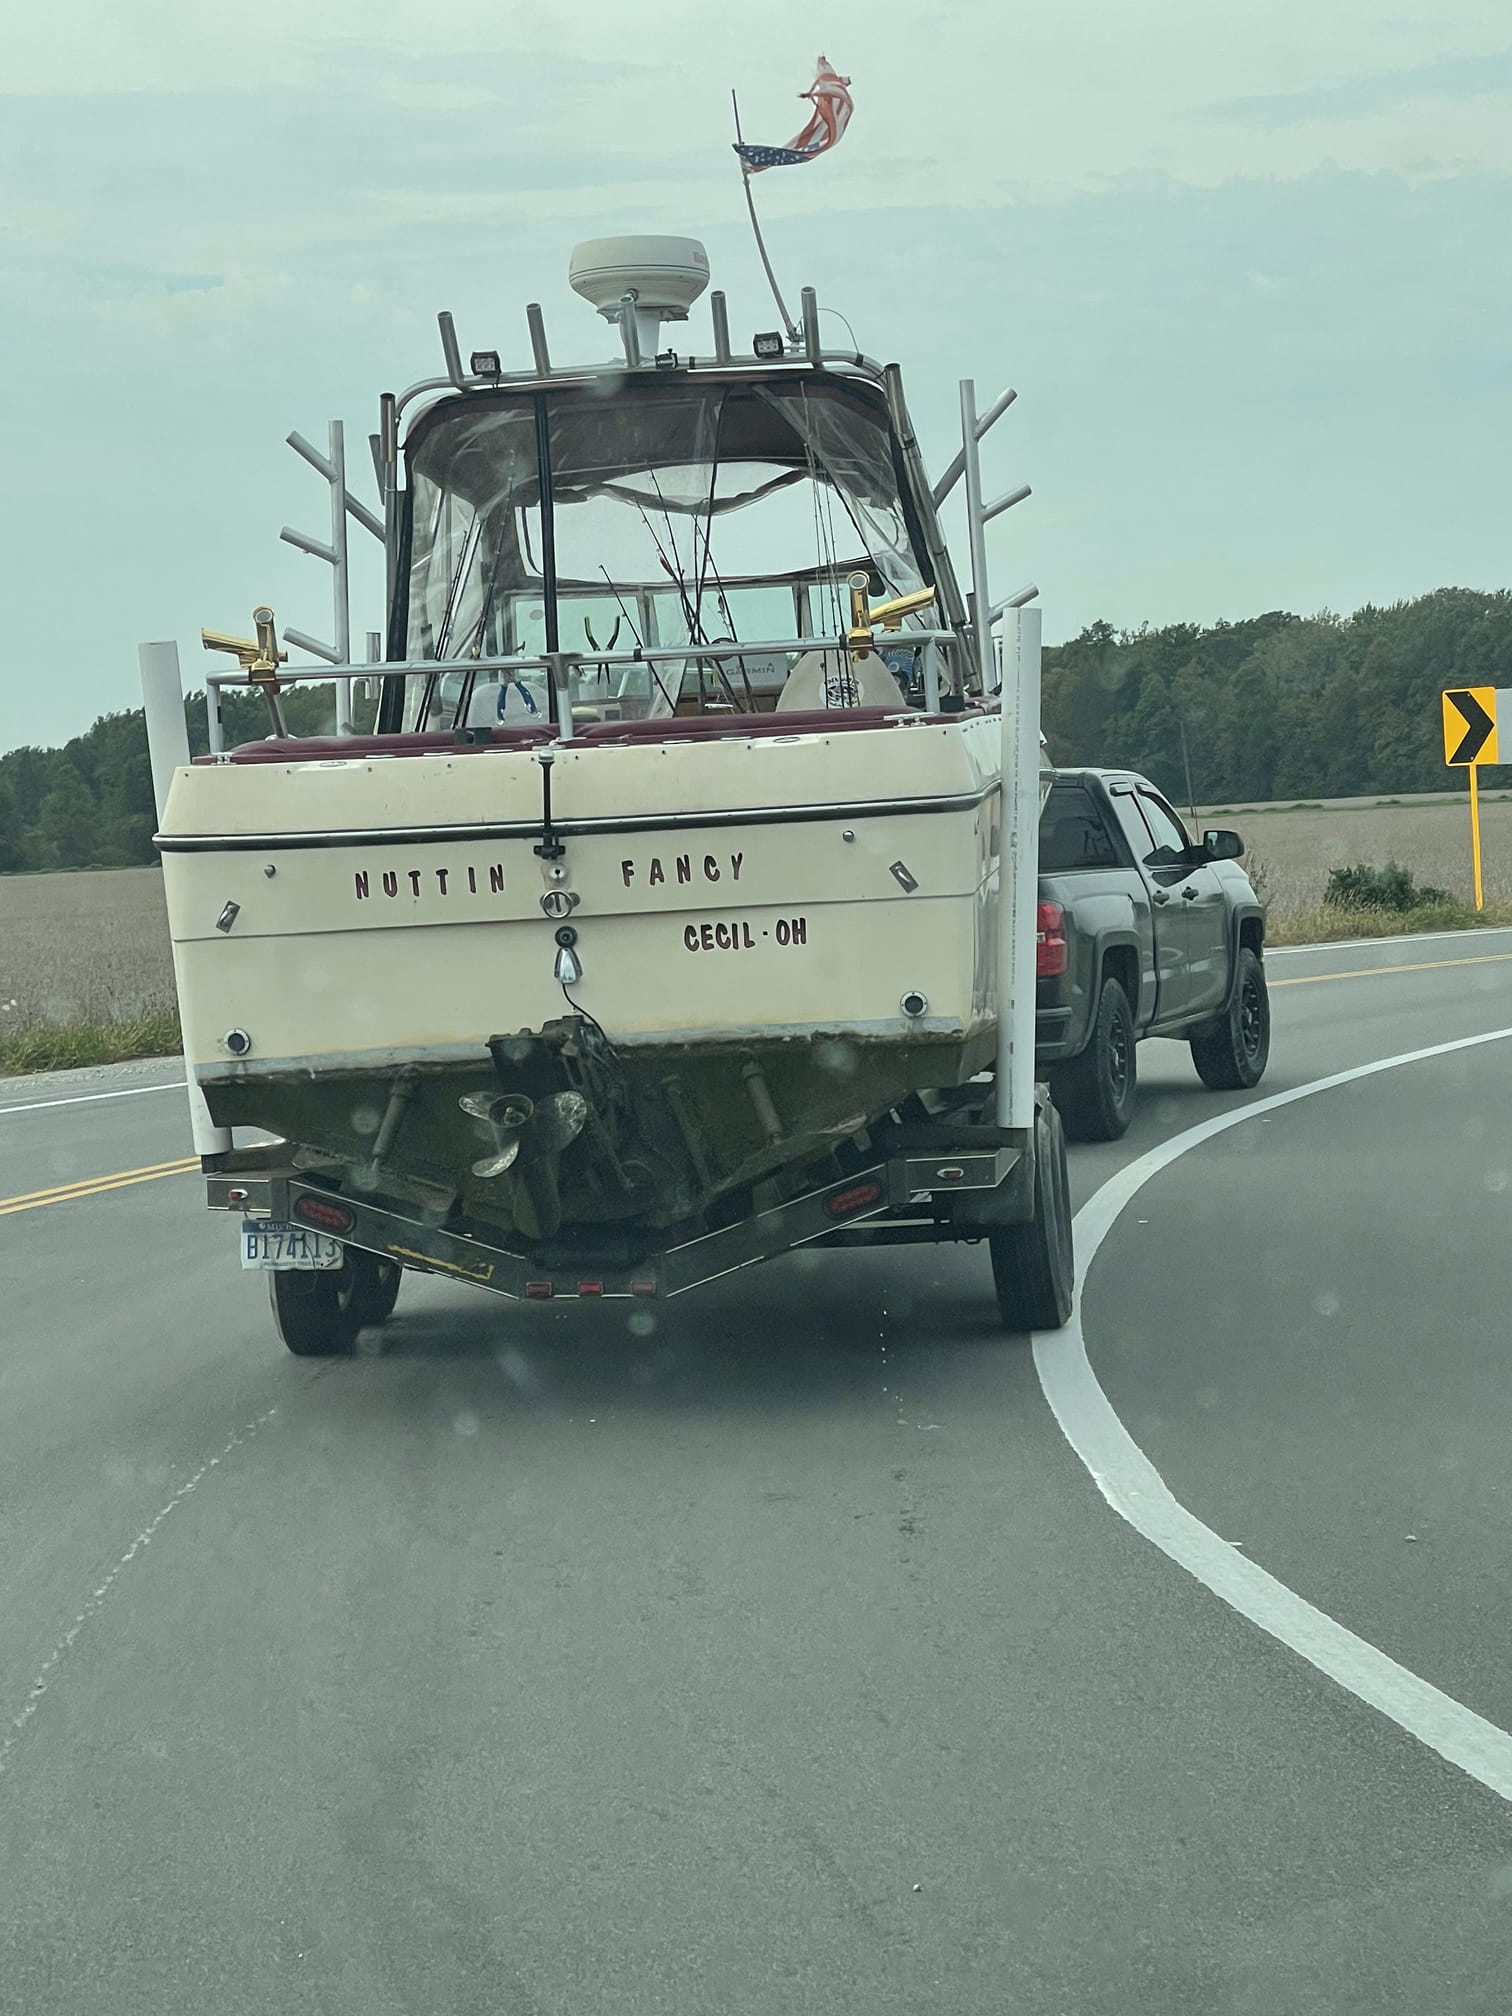 The majestic nuttin fancy boat from cecil ohio. I was stuck behind this old fart! But thats okay buddy, we still love you 